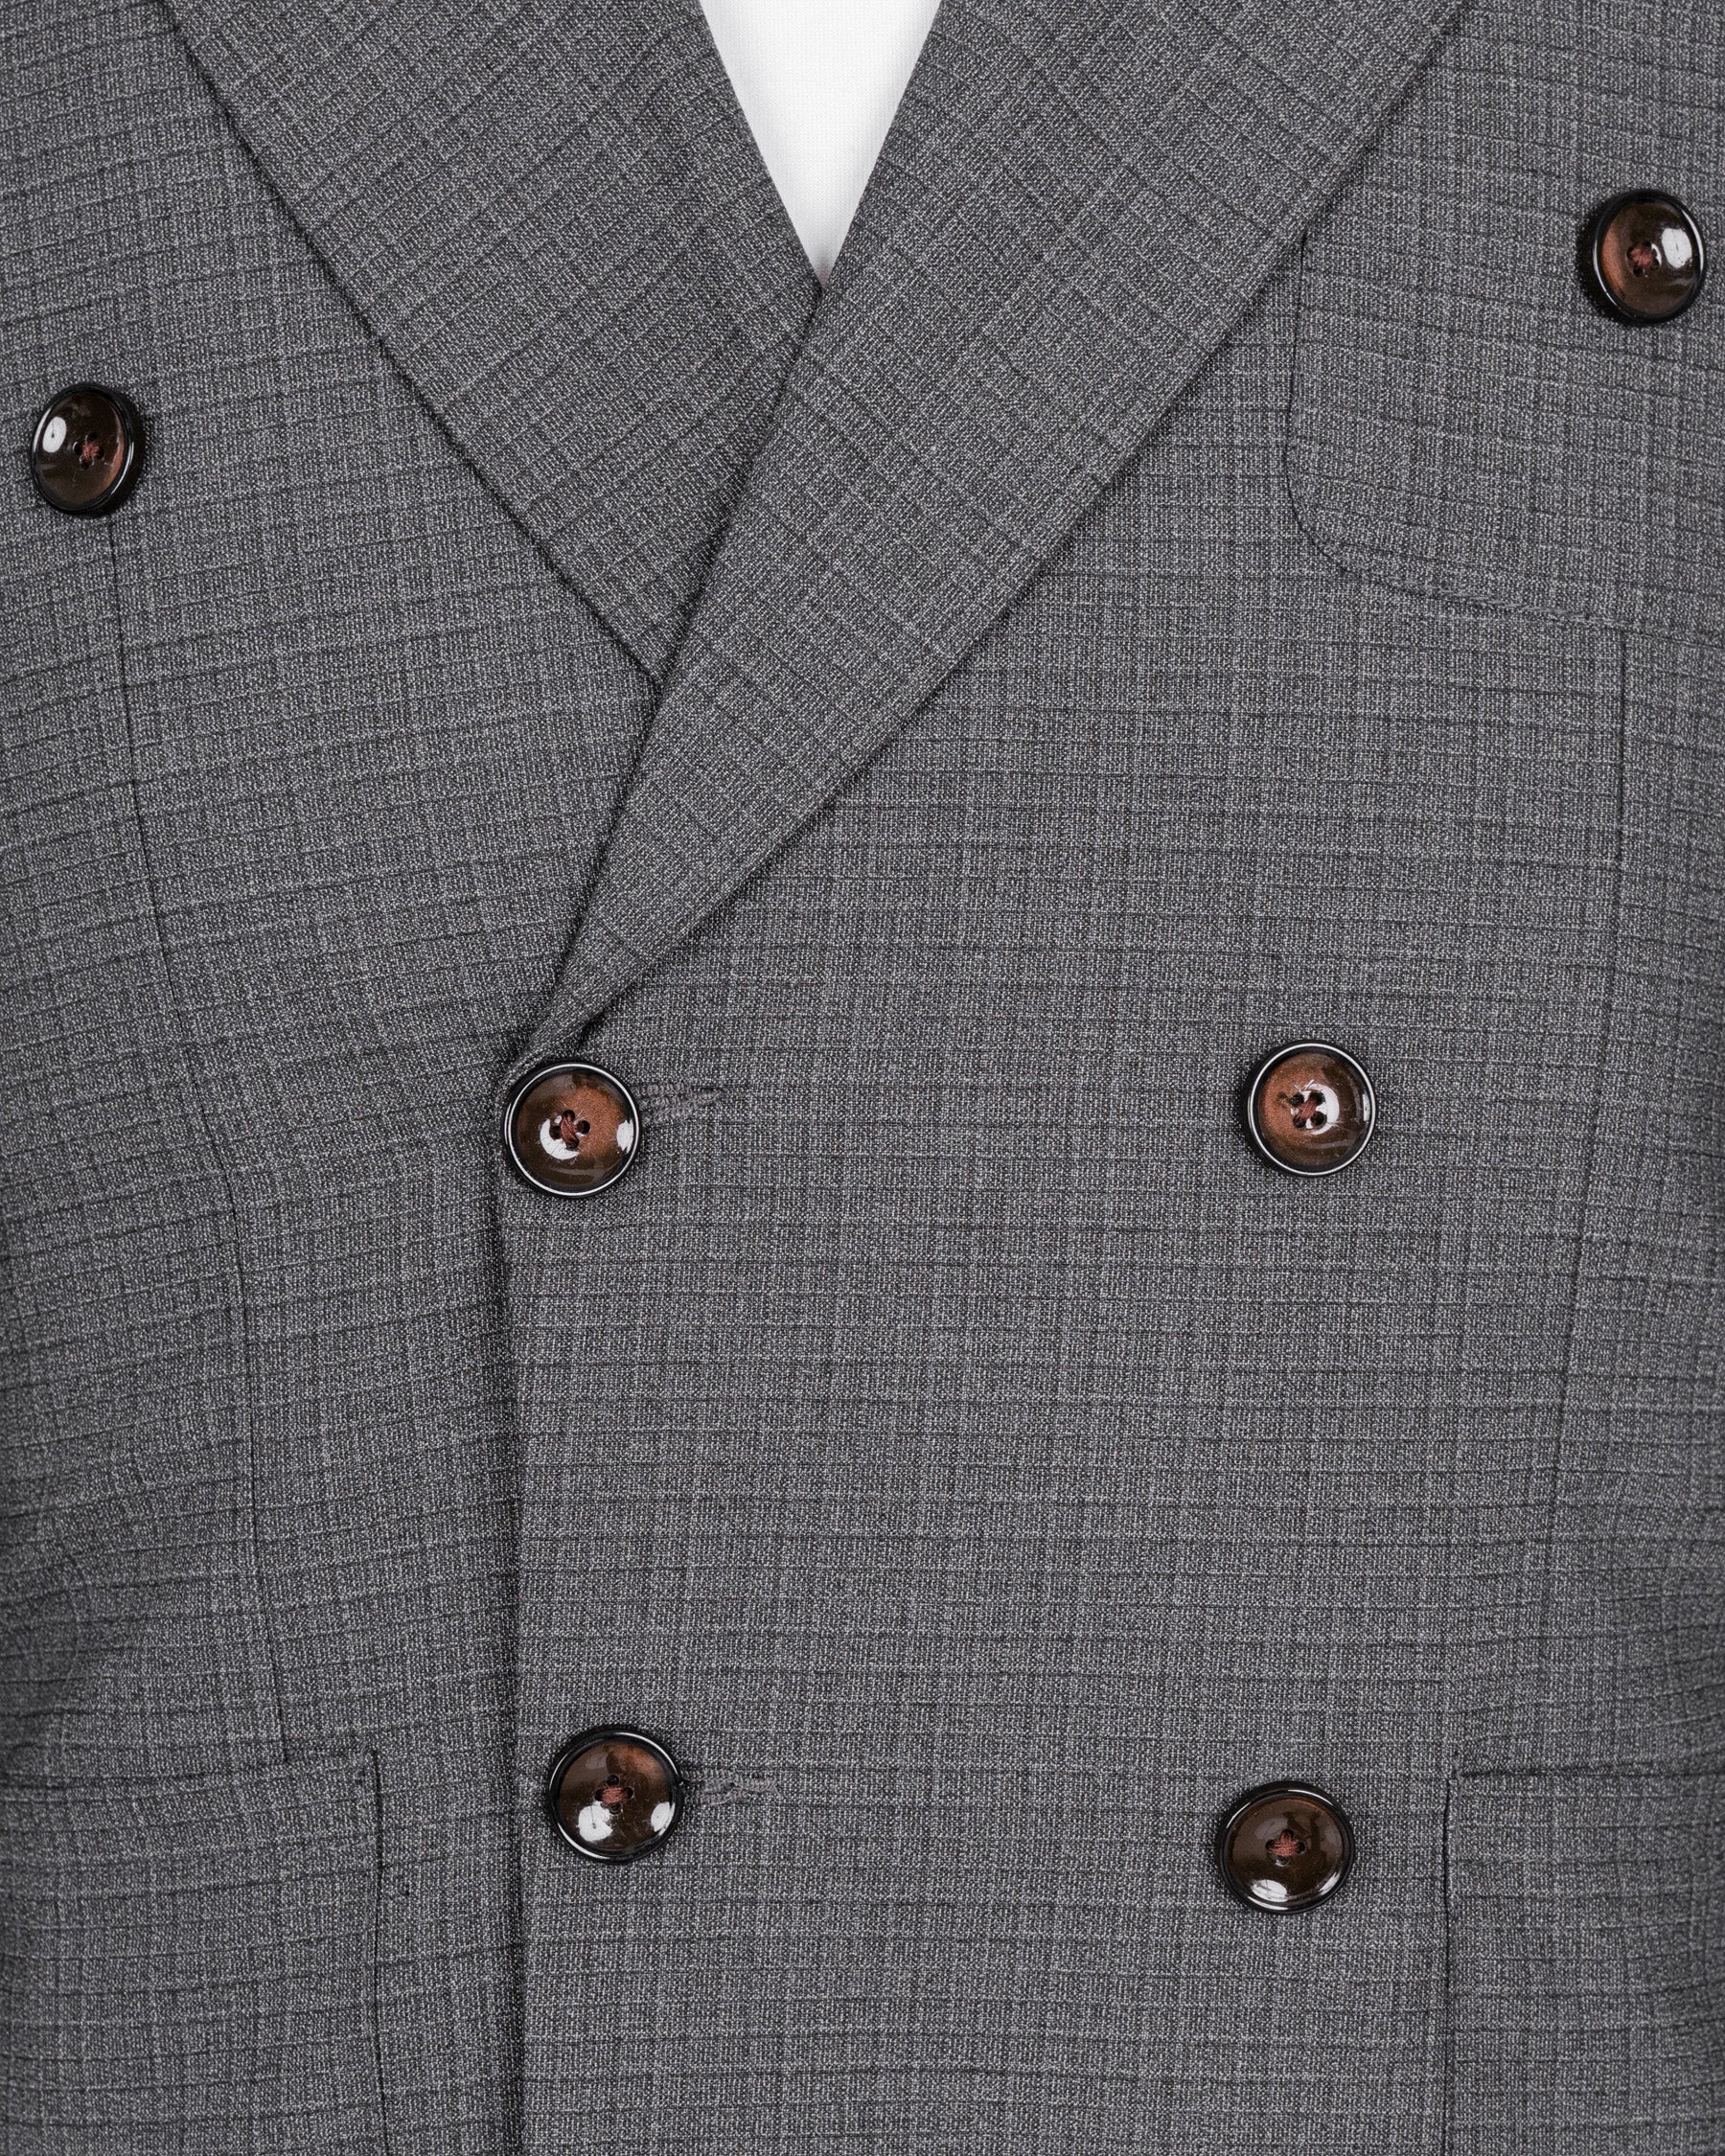 Fuscous Gray Chequered DouSTe Breasted Wool Rich Sports Suit ST1448-DB-PP-36,ST1448-DB-PP-38,ST1448-DB-PP-40,ST1448-DB-PP-42,ST1448-DB-PP-44,ST1448-DB-PP-46,ST1448-DB-PP-48,ST1448-DB-PP-50,ST1448-DB-PP-52,ST1448-DB-PP-54,ST1448-DB-PP-56,ST1448-DB-PP-58,ST1448-DB-PP-60